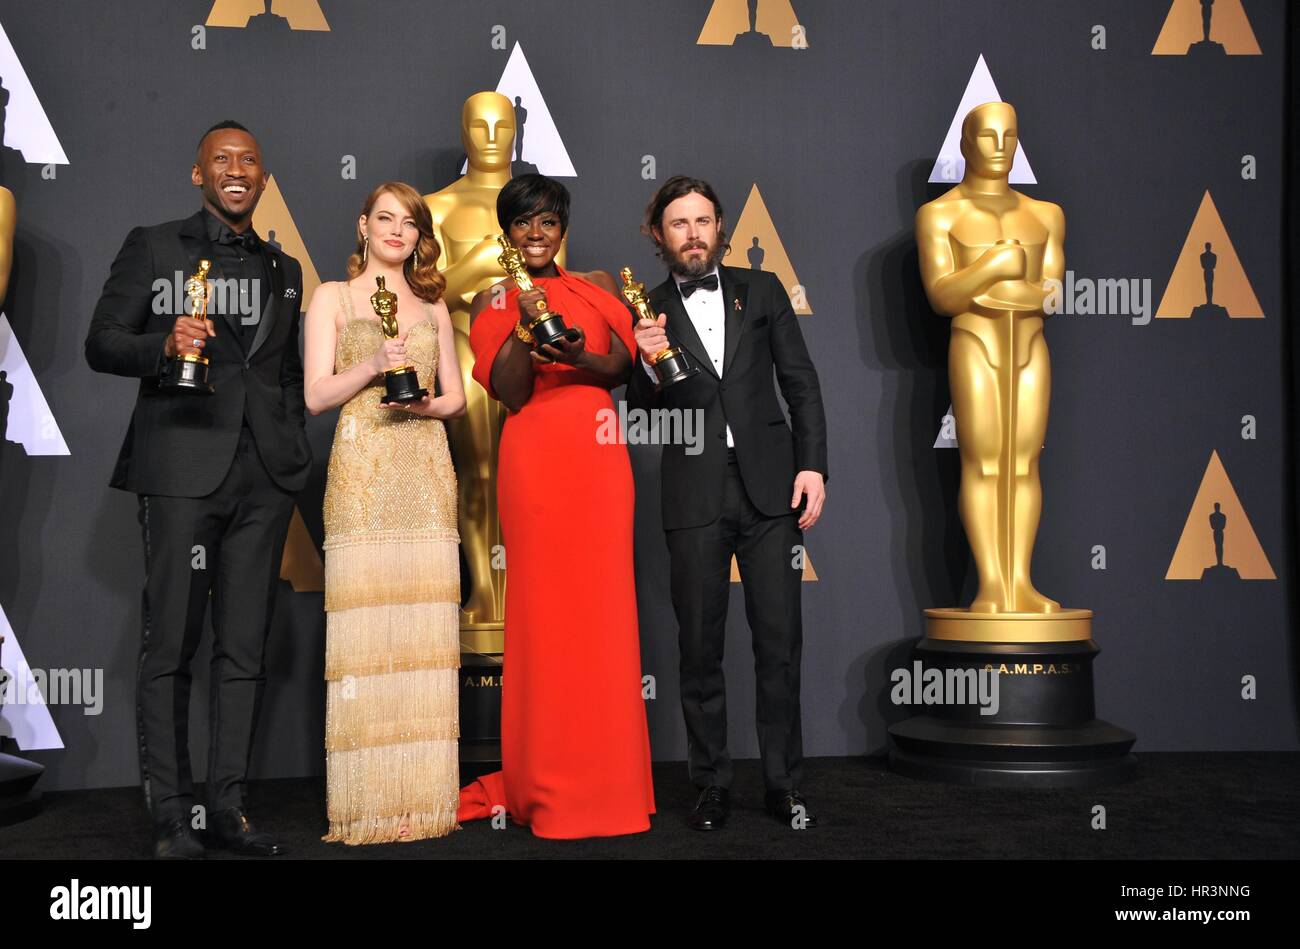 Los Angeles, CA, USA. 26th Feb, 2017. Mahershala Ali, Emma Stone, Viola Davis, Casey Affleck in the press room for The 89th Academy Awards Oscars 2017 - Press Room, The Dolby Theatre at Hollywood and Highland Center, Los Angeles, CA February 26, 2017. Credit: Elizabeth Goodenough/Everett Collection/Alamy Live News Stock Photo